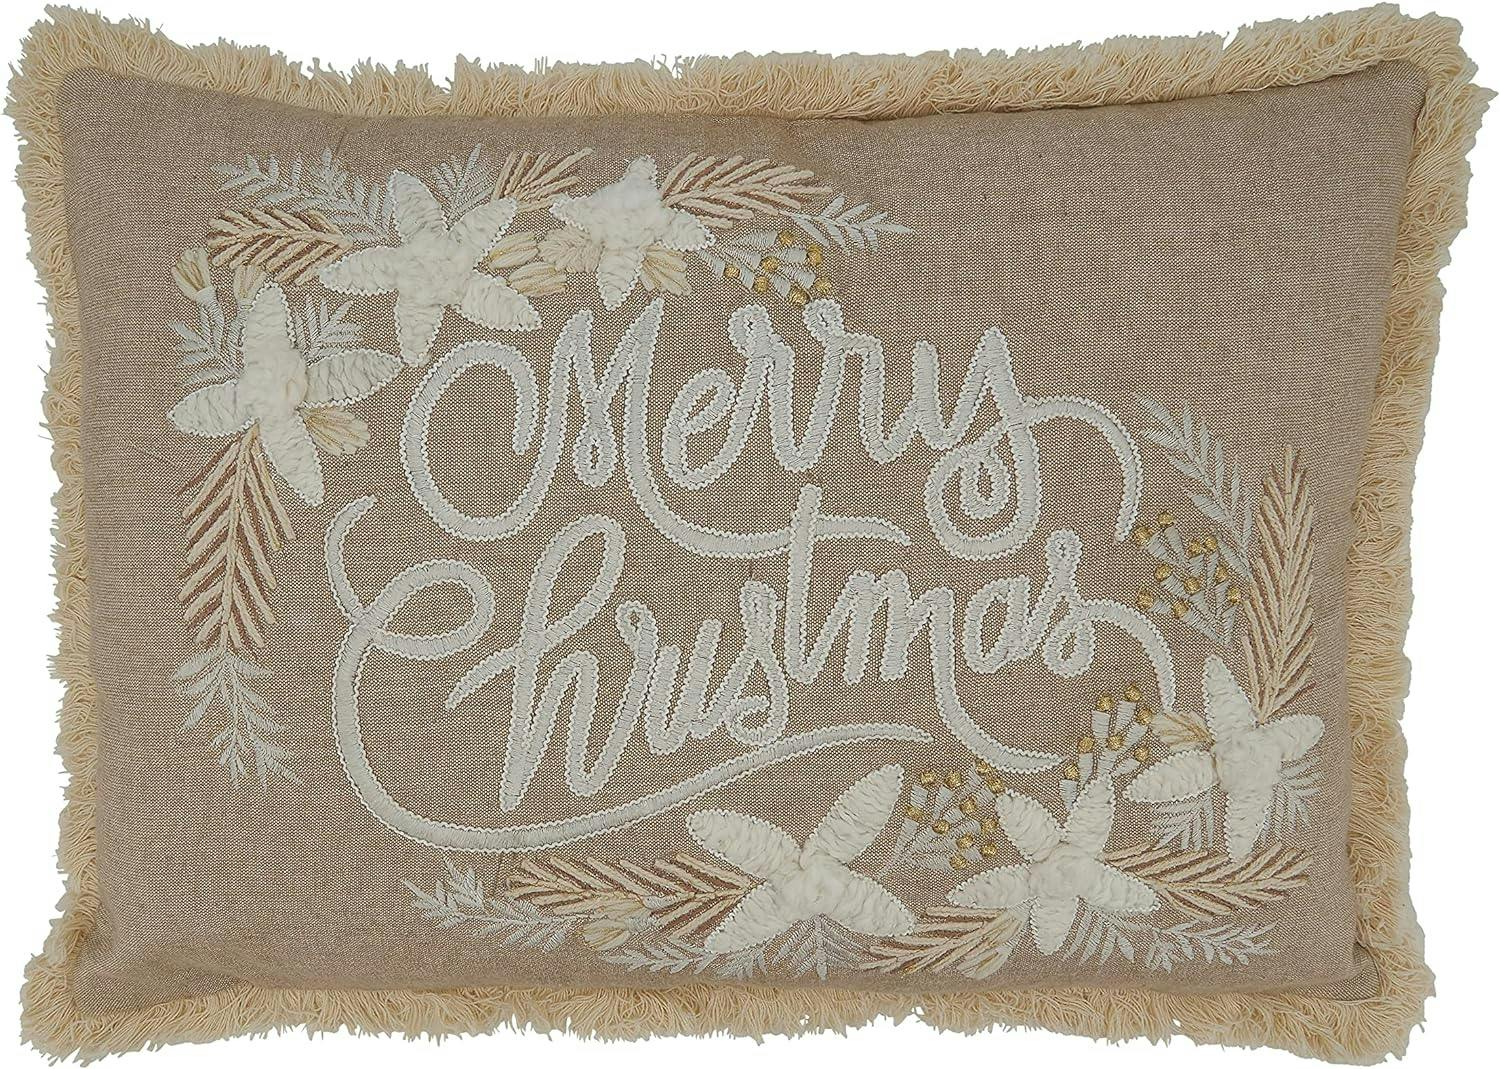 Natural Cotton Embroidered Merry Christmas 19.5" Throw Pillow Cover